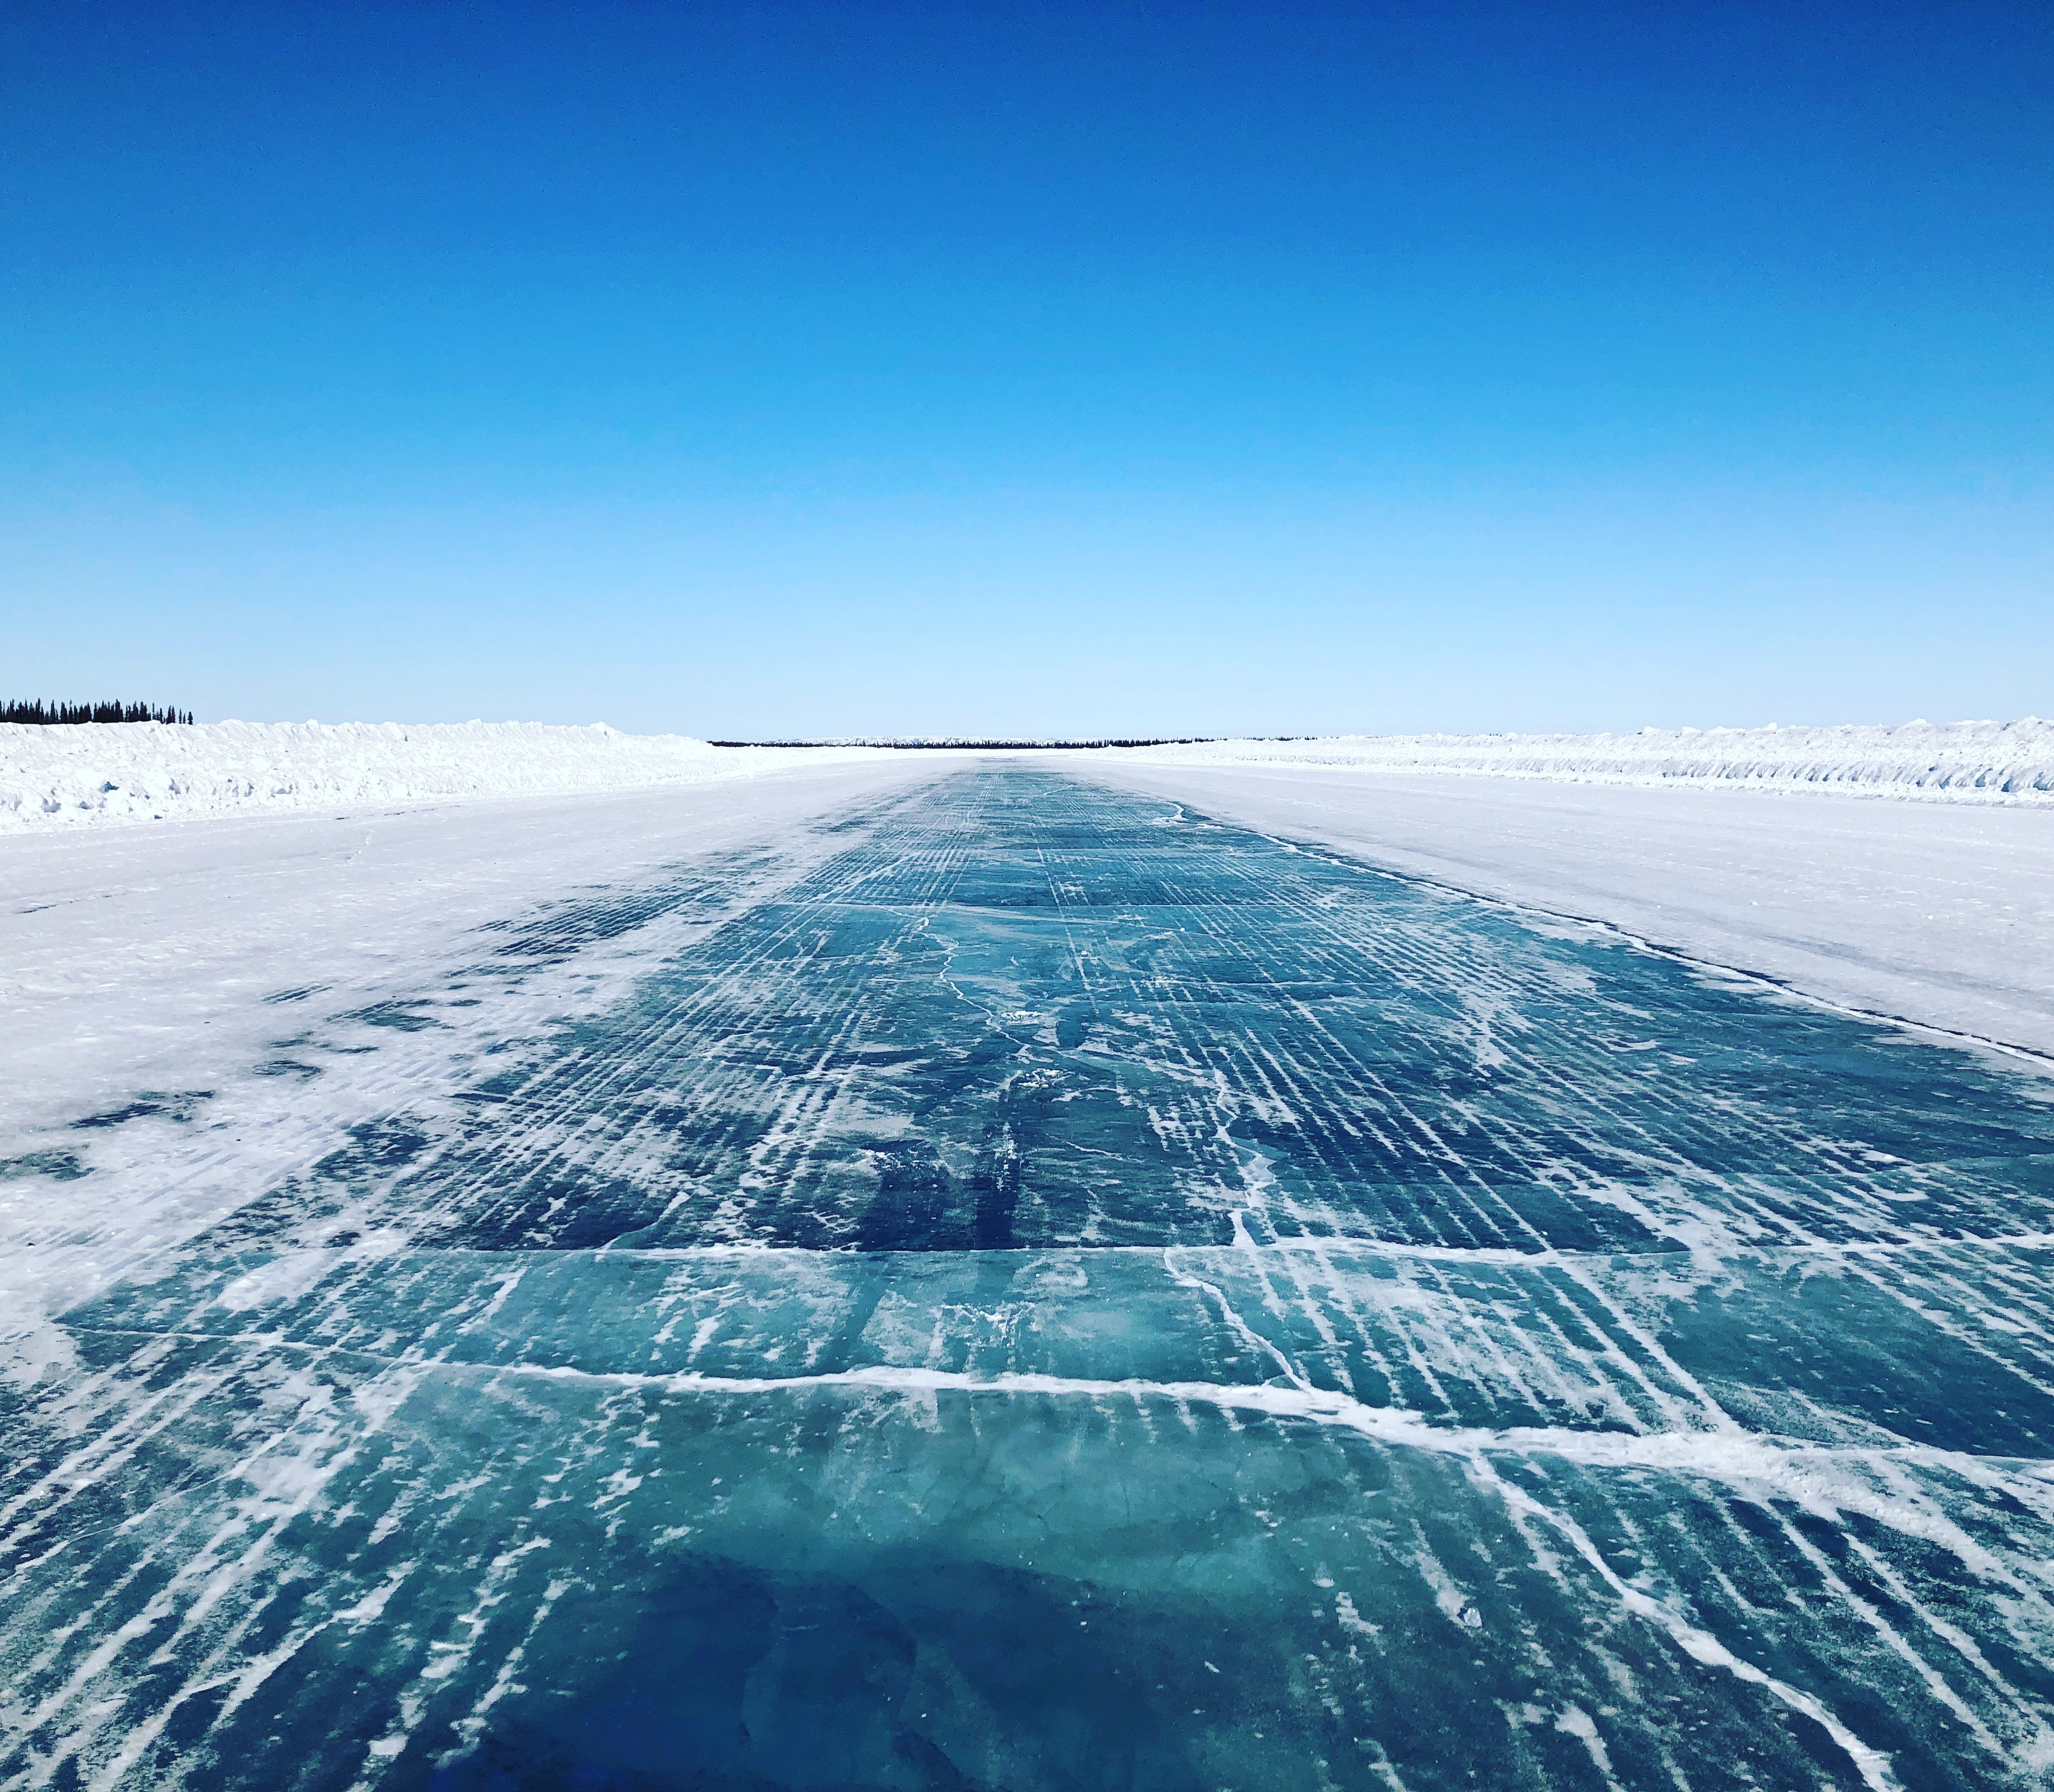 The ice road